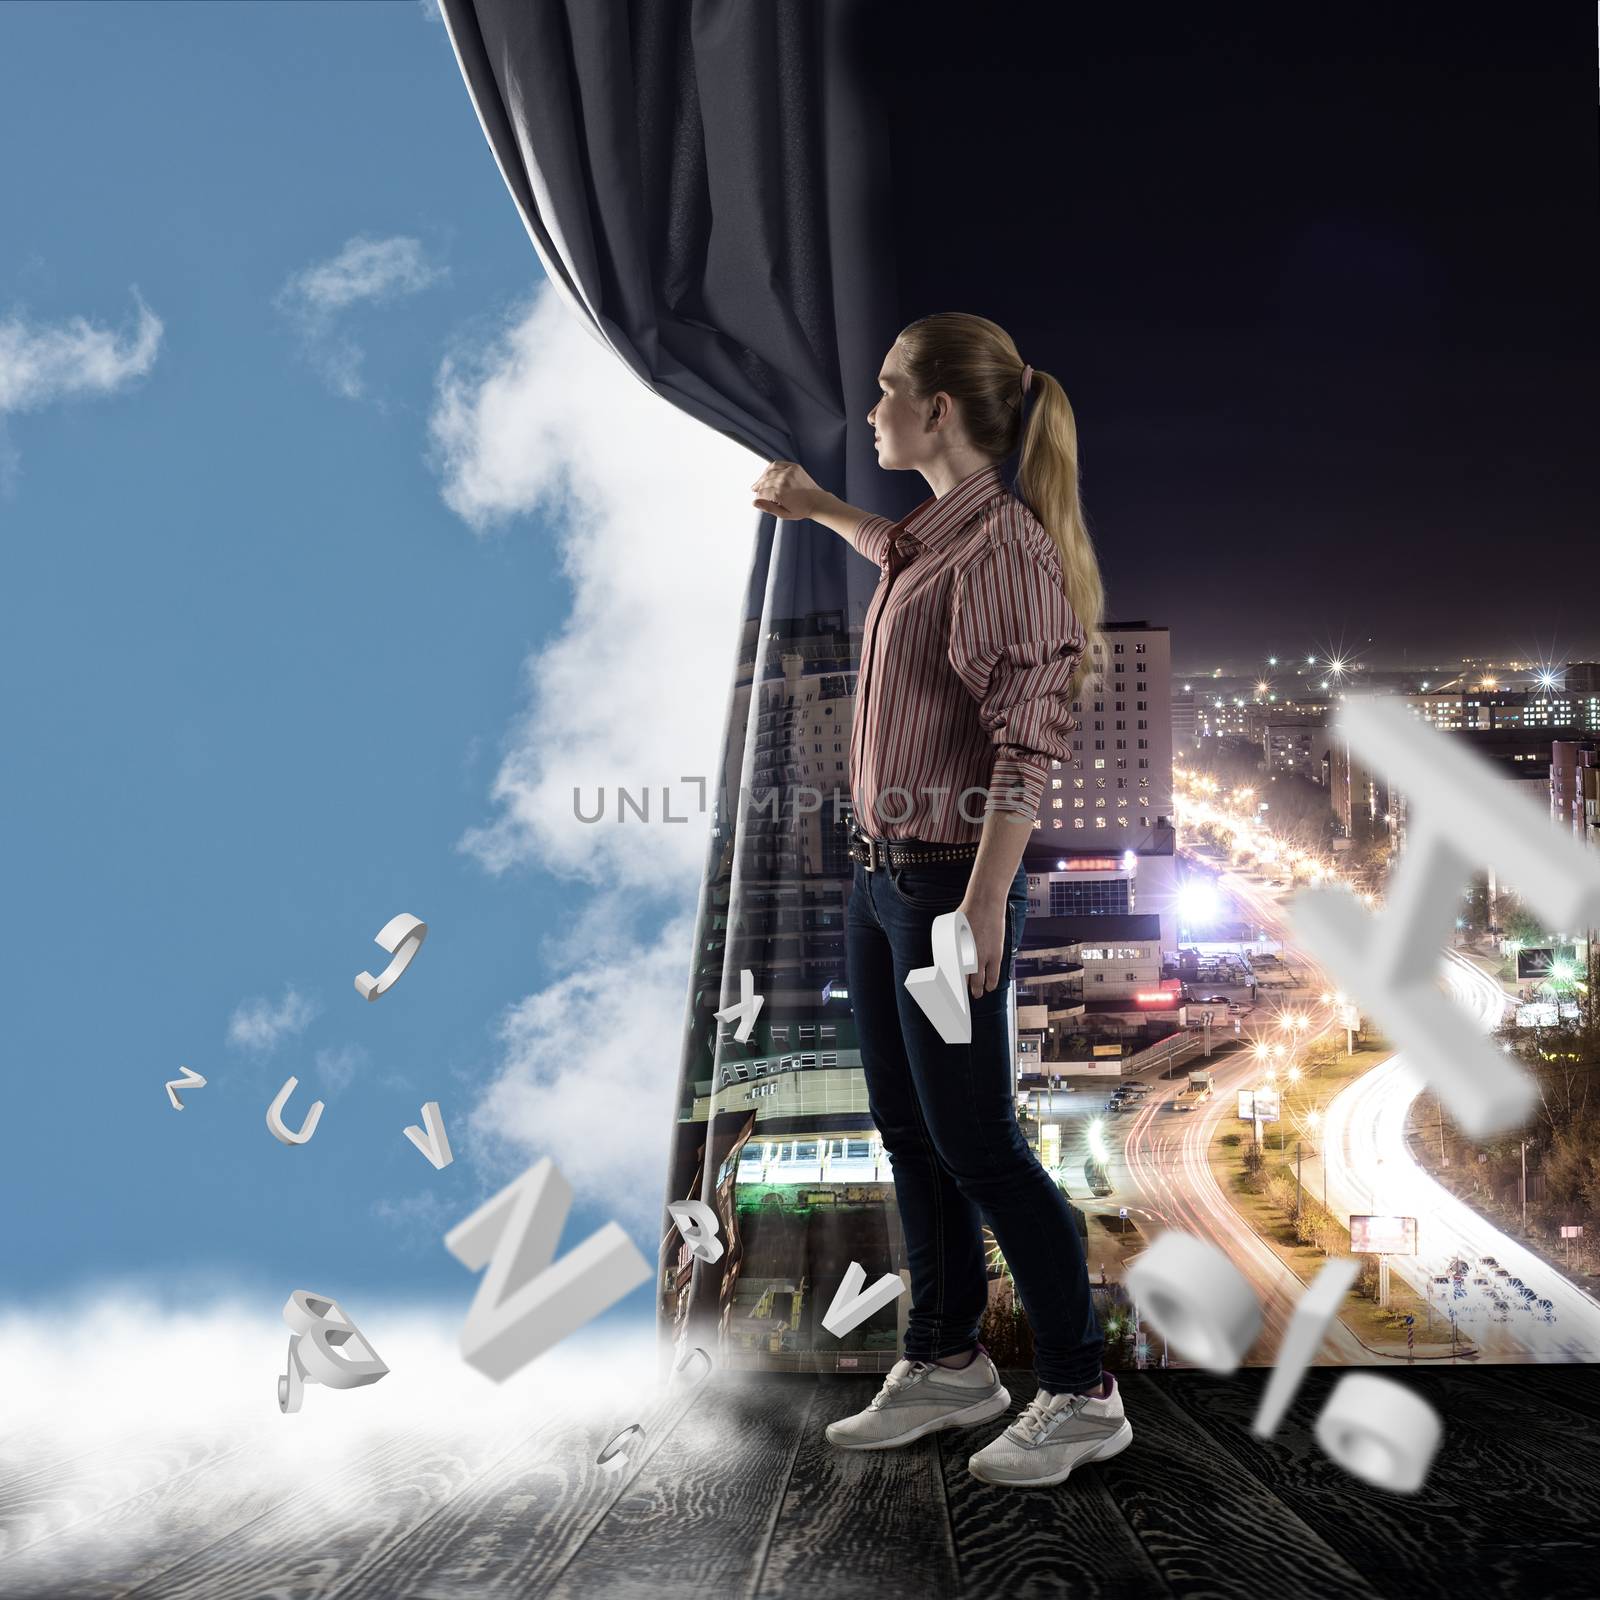 image of a young woman pushes the curtain looking at clouds